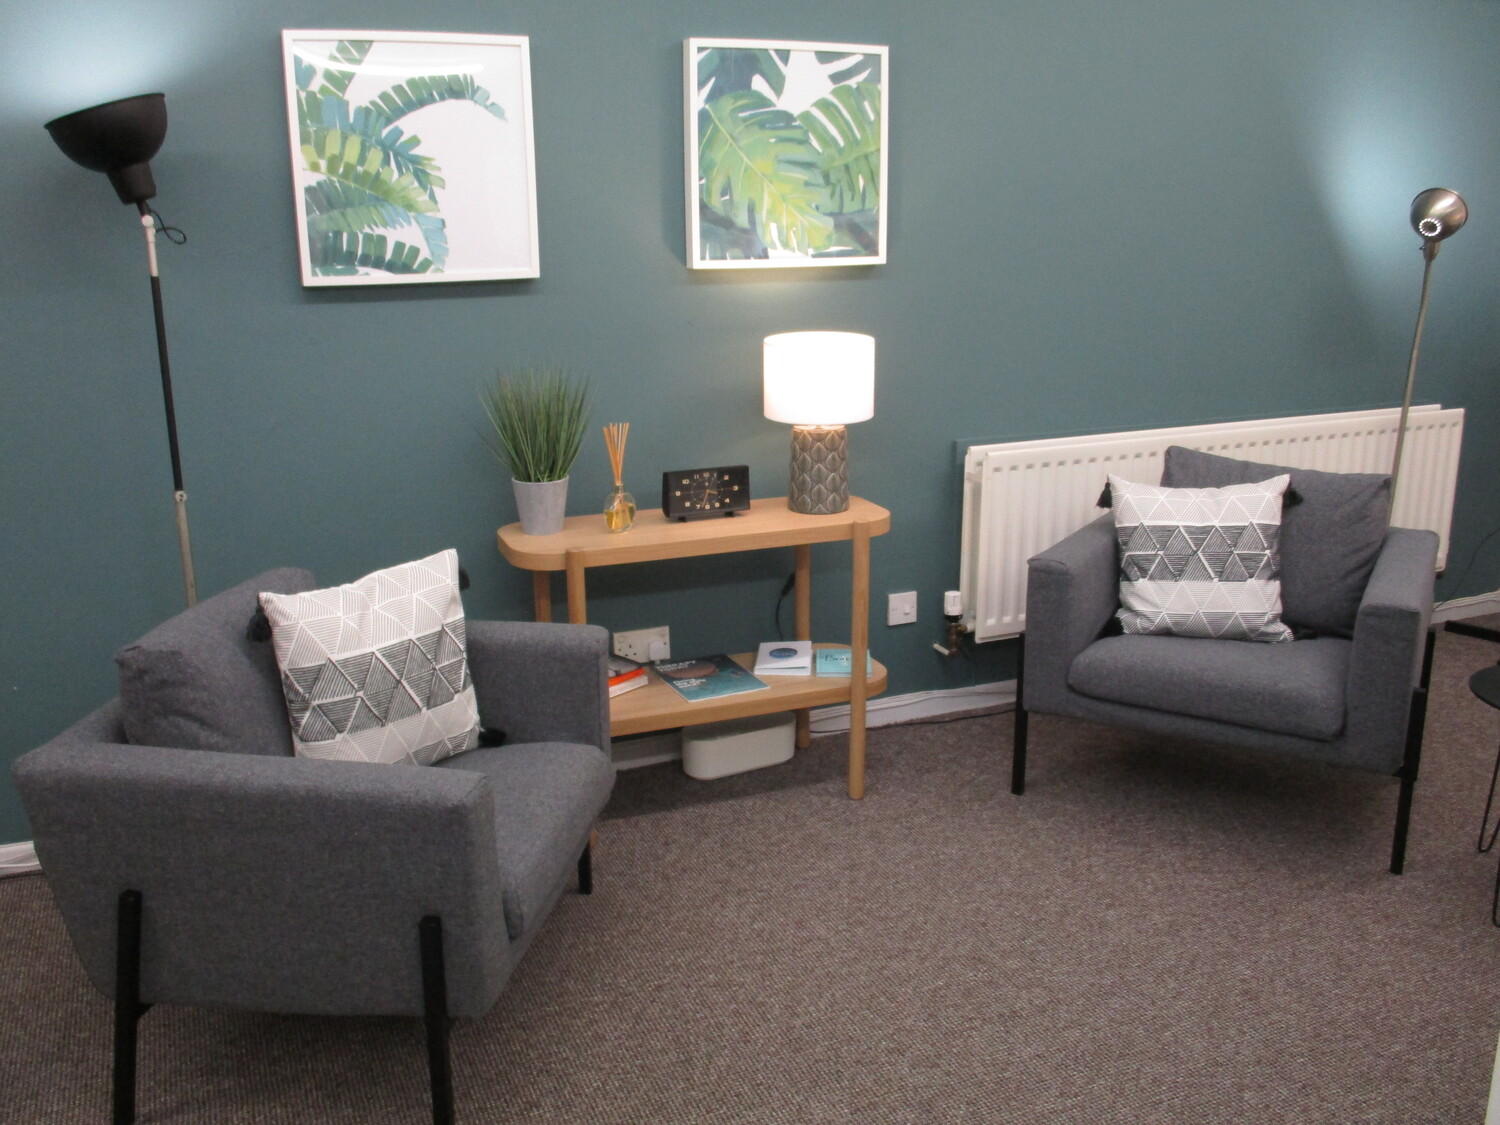 Gallery Photo of Adult Therapy Space